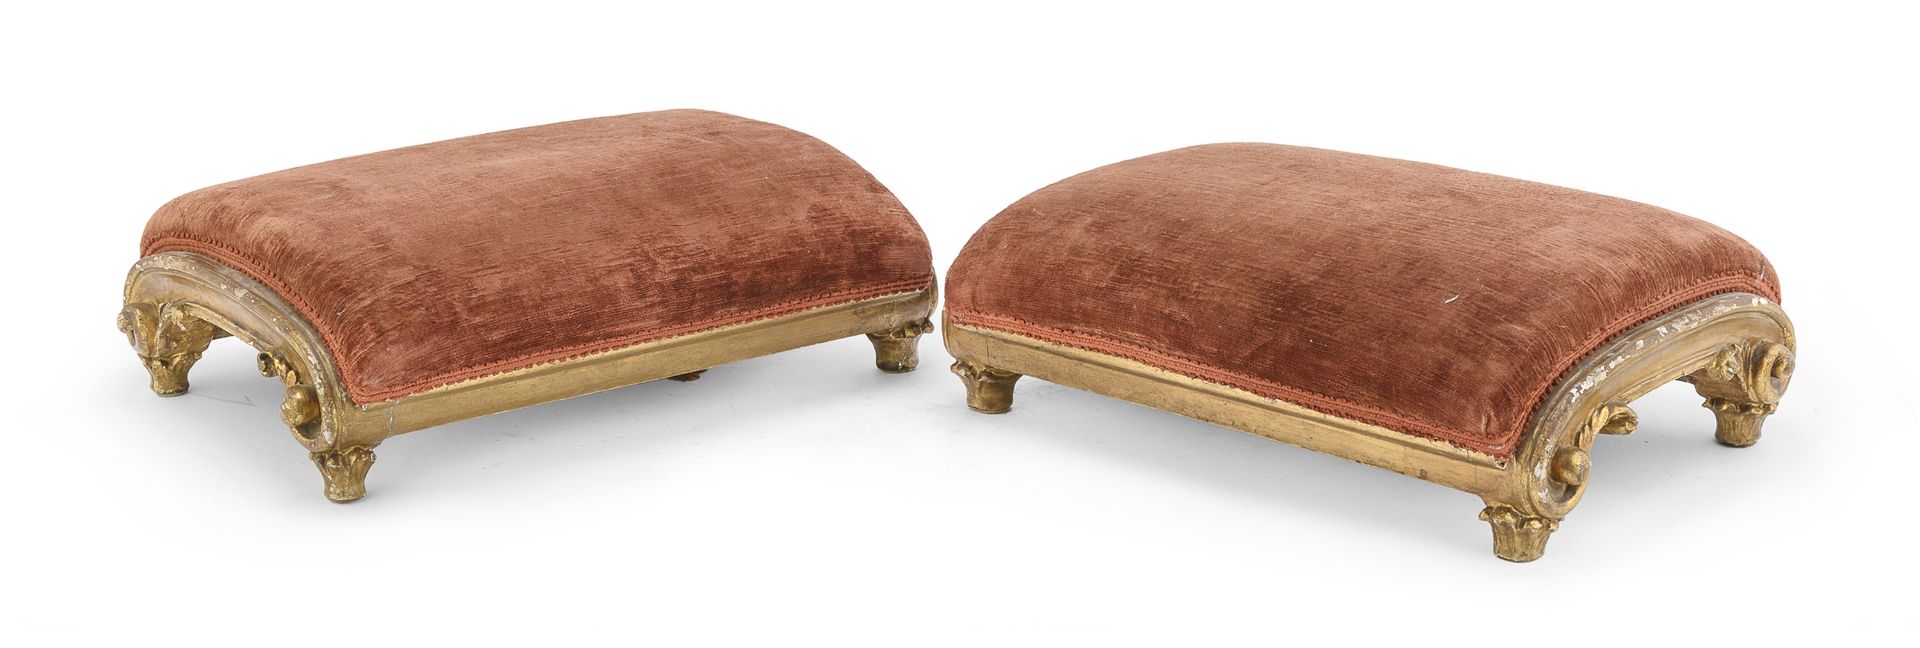 PAIR OF GILTWOOD STOOLS ELEMENTS OF THE 18TH CENTURY